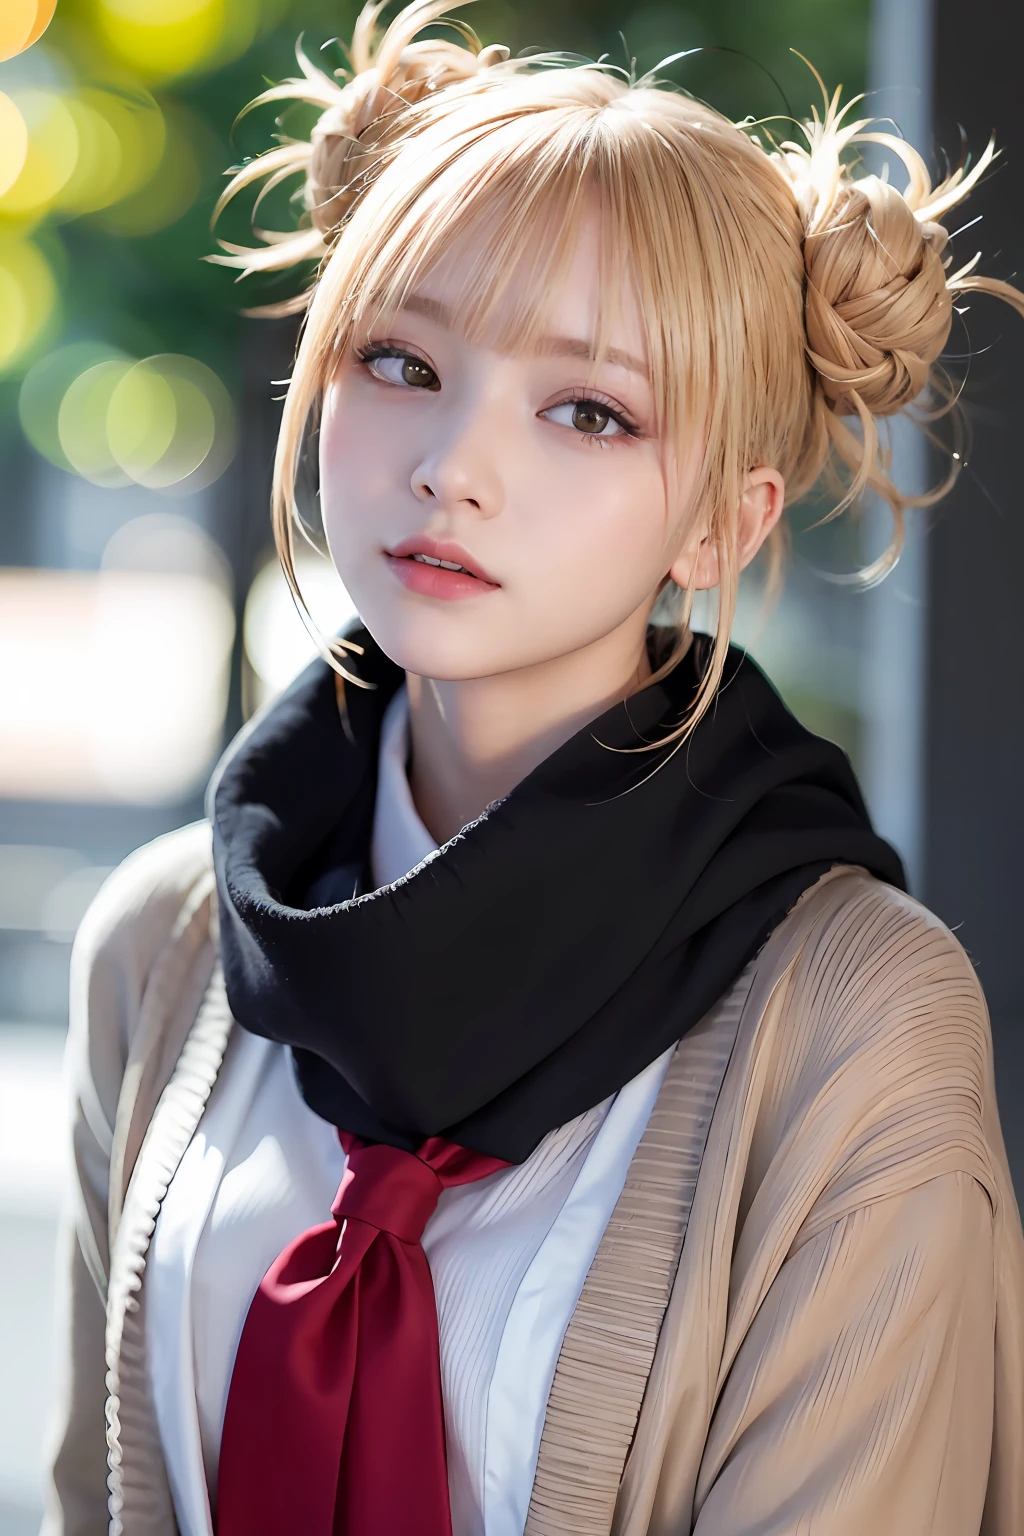 （（a blond、Himiko Toga、White Uniform Shirt、Dark blue uniform skirt、cardigan、red scarf、Dark eye shadow、Dark eyeliner、Patsun、Twin-tailed、Bun head、tthin eyebrows、Black socks、））、NSFW、​masterpiece、top-quality、hightquality、magnifica、Beautiful fece、hight resolution、Very high resolution、Raw photo、Best Illustration、hyper realisitic、1girl、realisitic、The ultra-detailliert、Photorealsitic、incredibly absurdness、a closeup、Floating hair、Soft light、Cinema Lights、Film Grain、full bodyesbian、depth of fields、blurry backround、bokeh dof:1.4、eyes focus、85mmレンズ、professionally lit、lensflare、Luminous particles:0.6、Professional Writing、portlate:0.6、Photon Mapping、Radio City、physically-based renderingt、a japanese girl、sexual excitement:1.5、lifelike face、Realistic body、real looking skin、huge-breasted:1.3、well-styled、camel's toe、light skinned:1.1、cute little:1.5